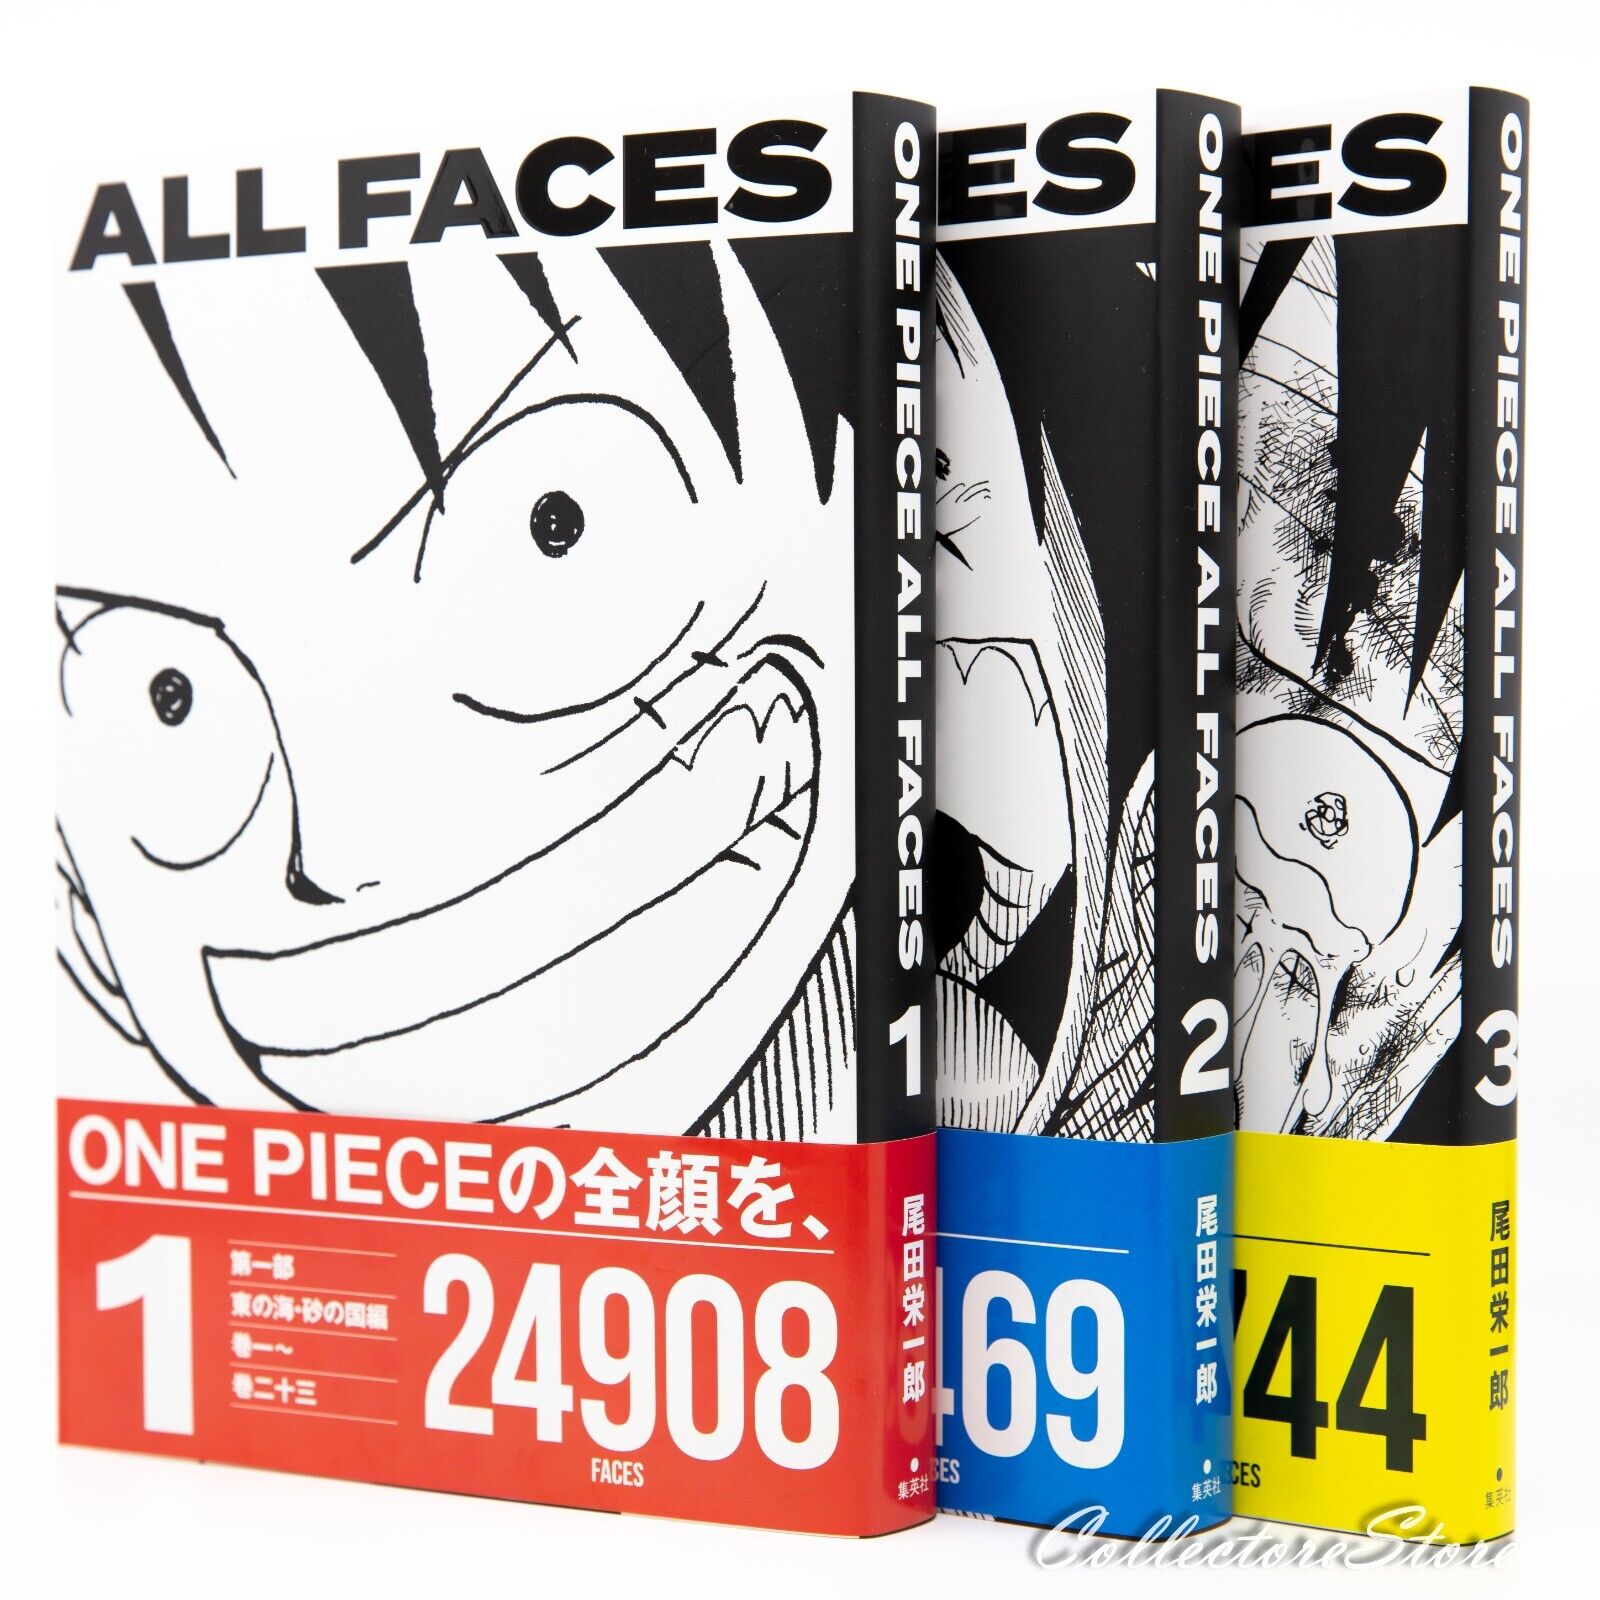 FedEx/DHL | One Piece All Faces 1 - 3 Collector's Edition Comic